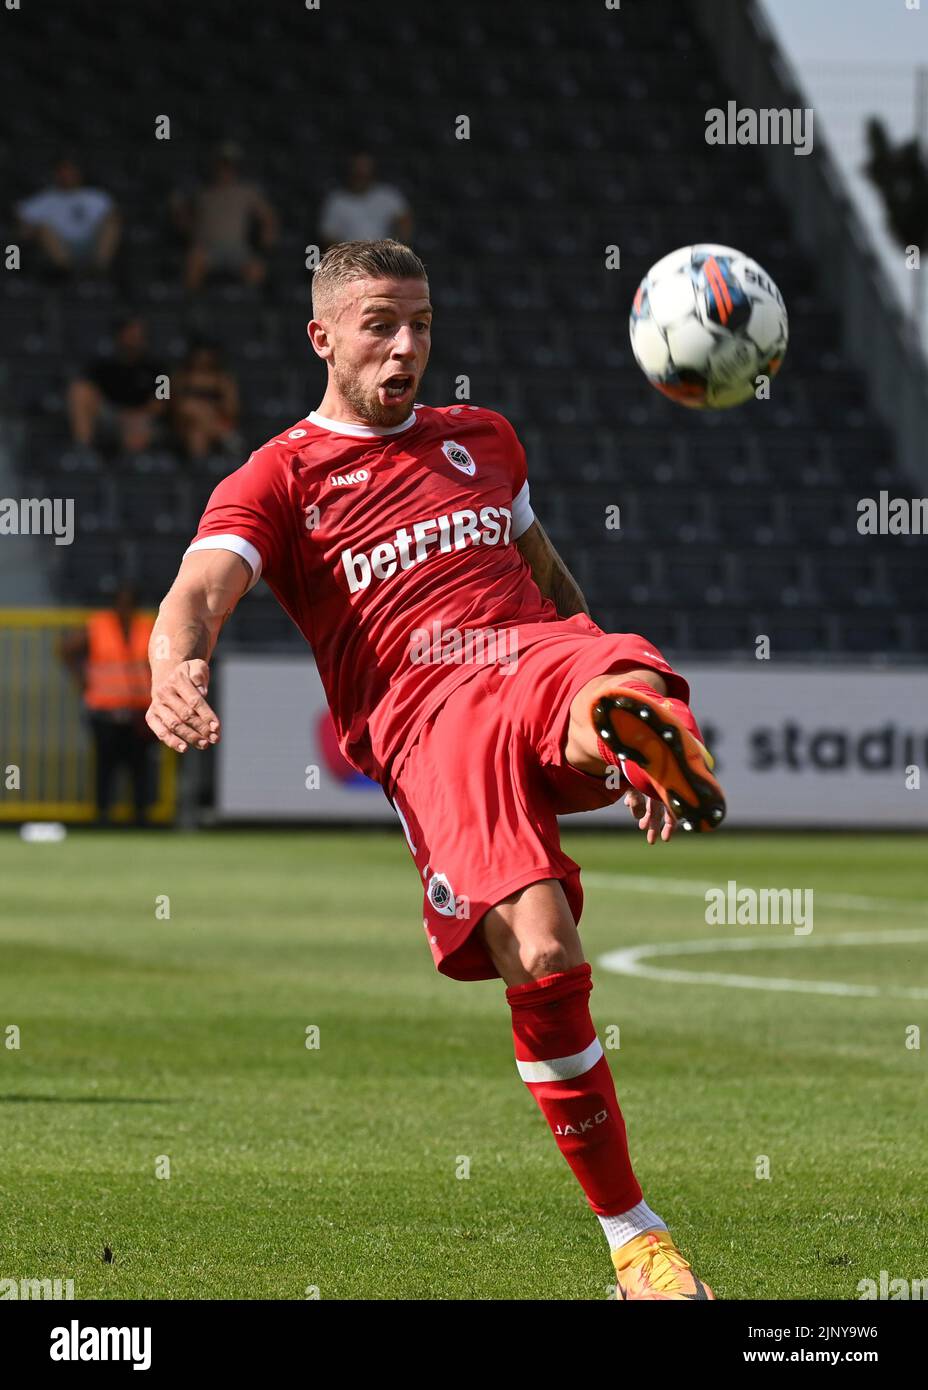 Antwerp's Toby Alderweireld fights for the ball during a soccer match between KAS Eupen and Royal Antwerp FC RAFC, Sunday 14 August 2022 in Eupen, on day 4 of the 2022-2023 'Jupiler Pro League' first division of the Belgian championship. BELGA PHOTO JOHN THYS Stock Photo